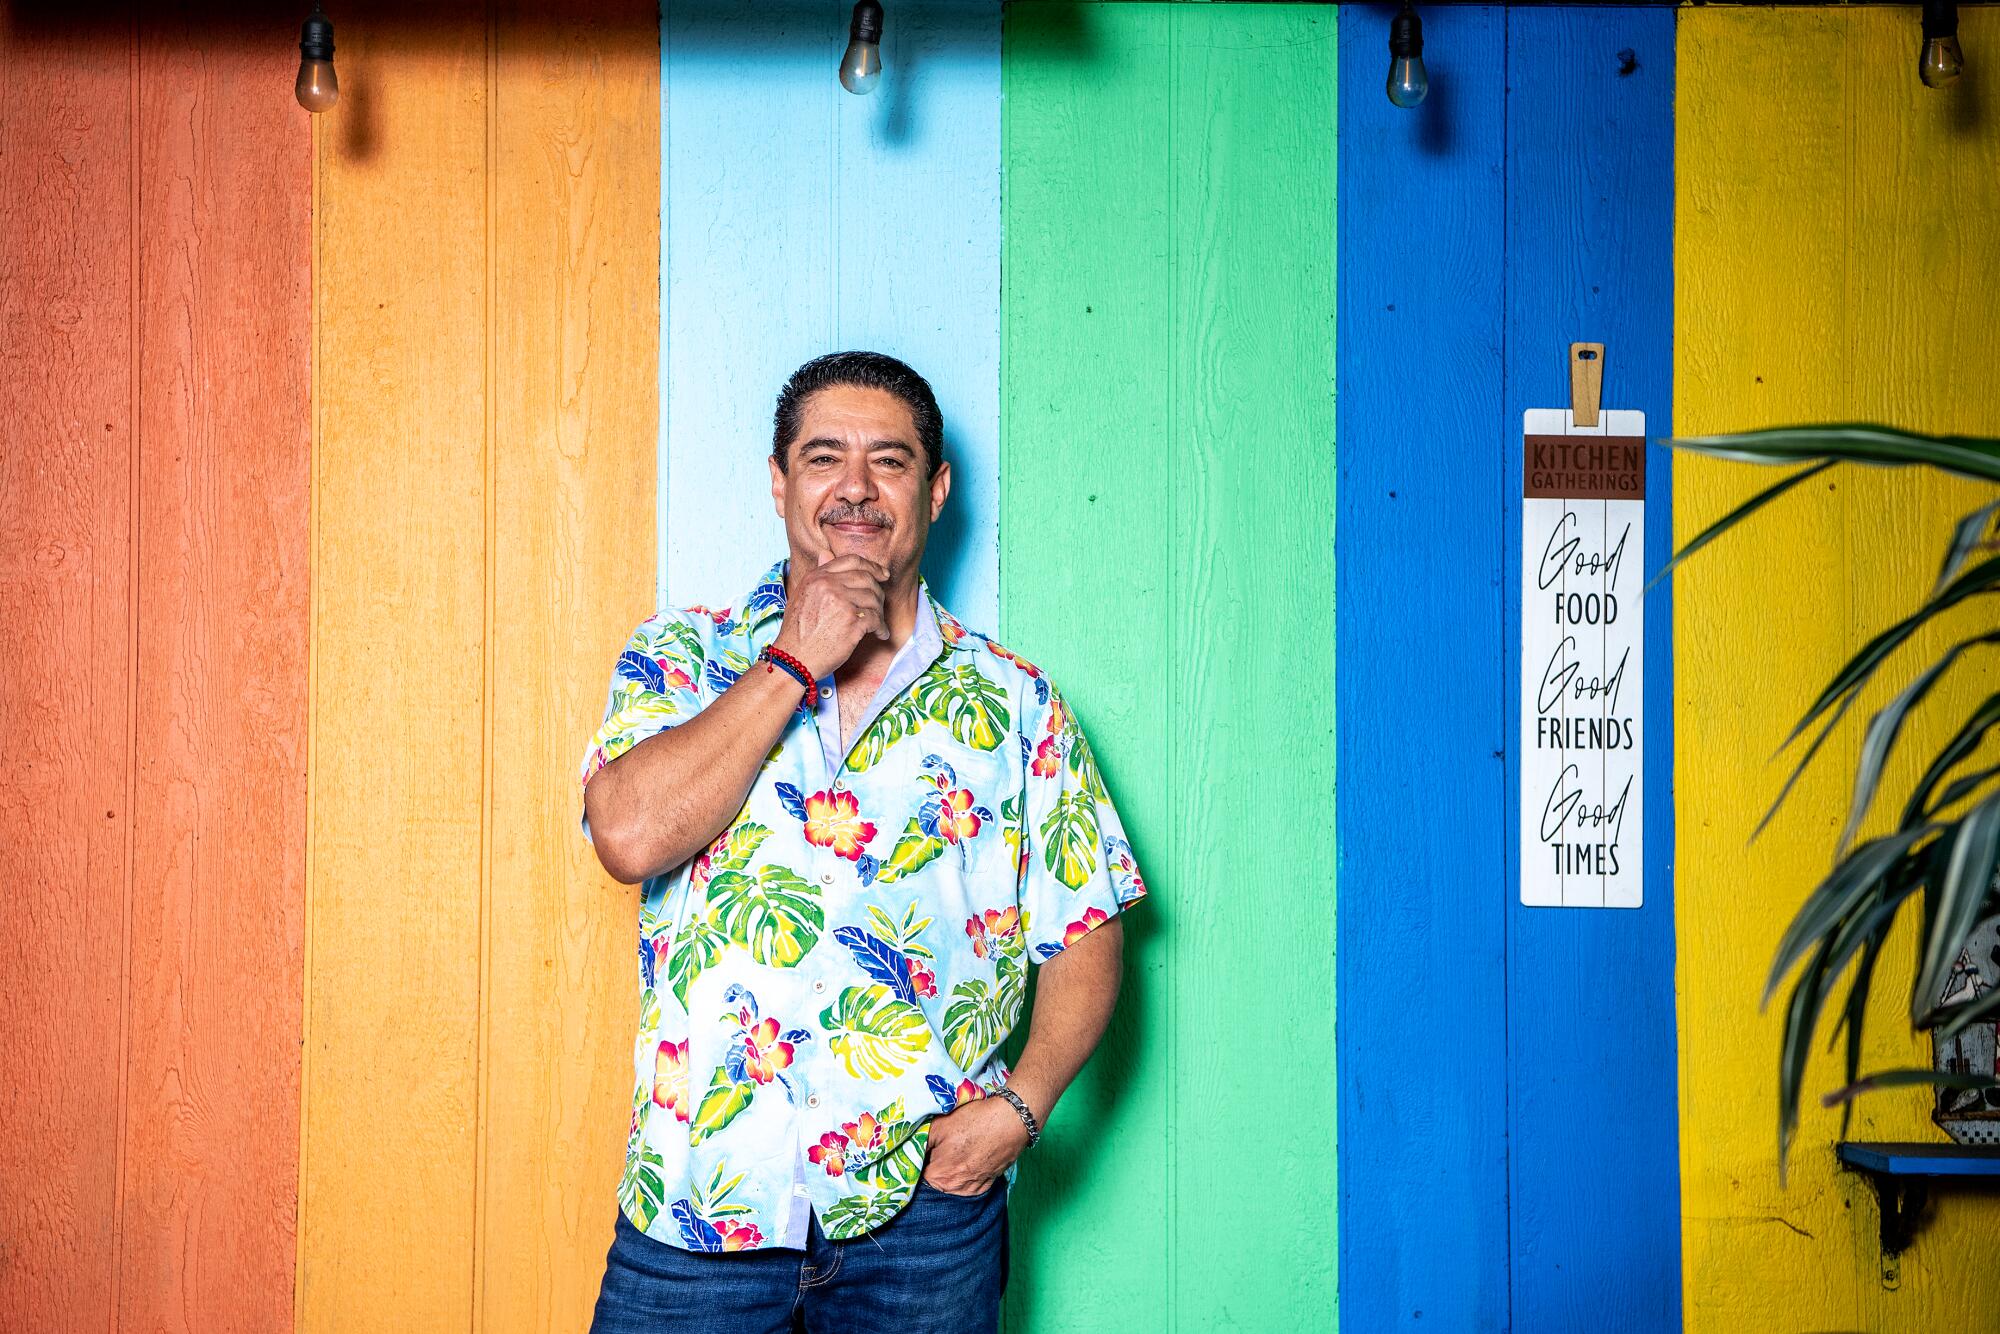 A man in an aloha shirt stands in front of a wall painted in colorful vertical stripes